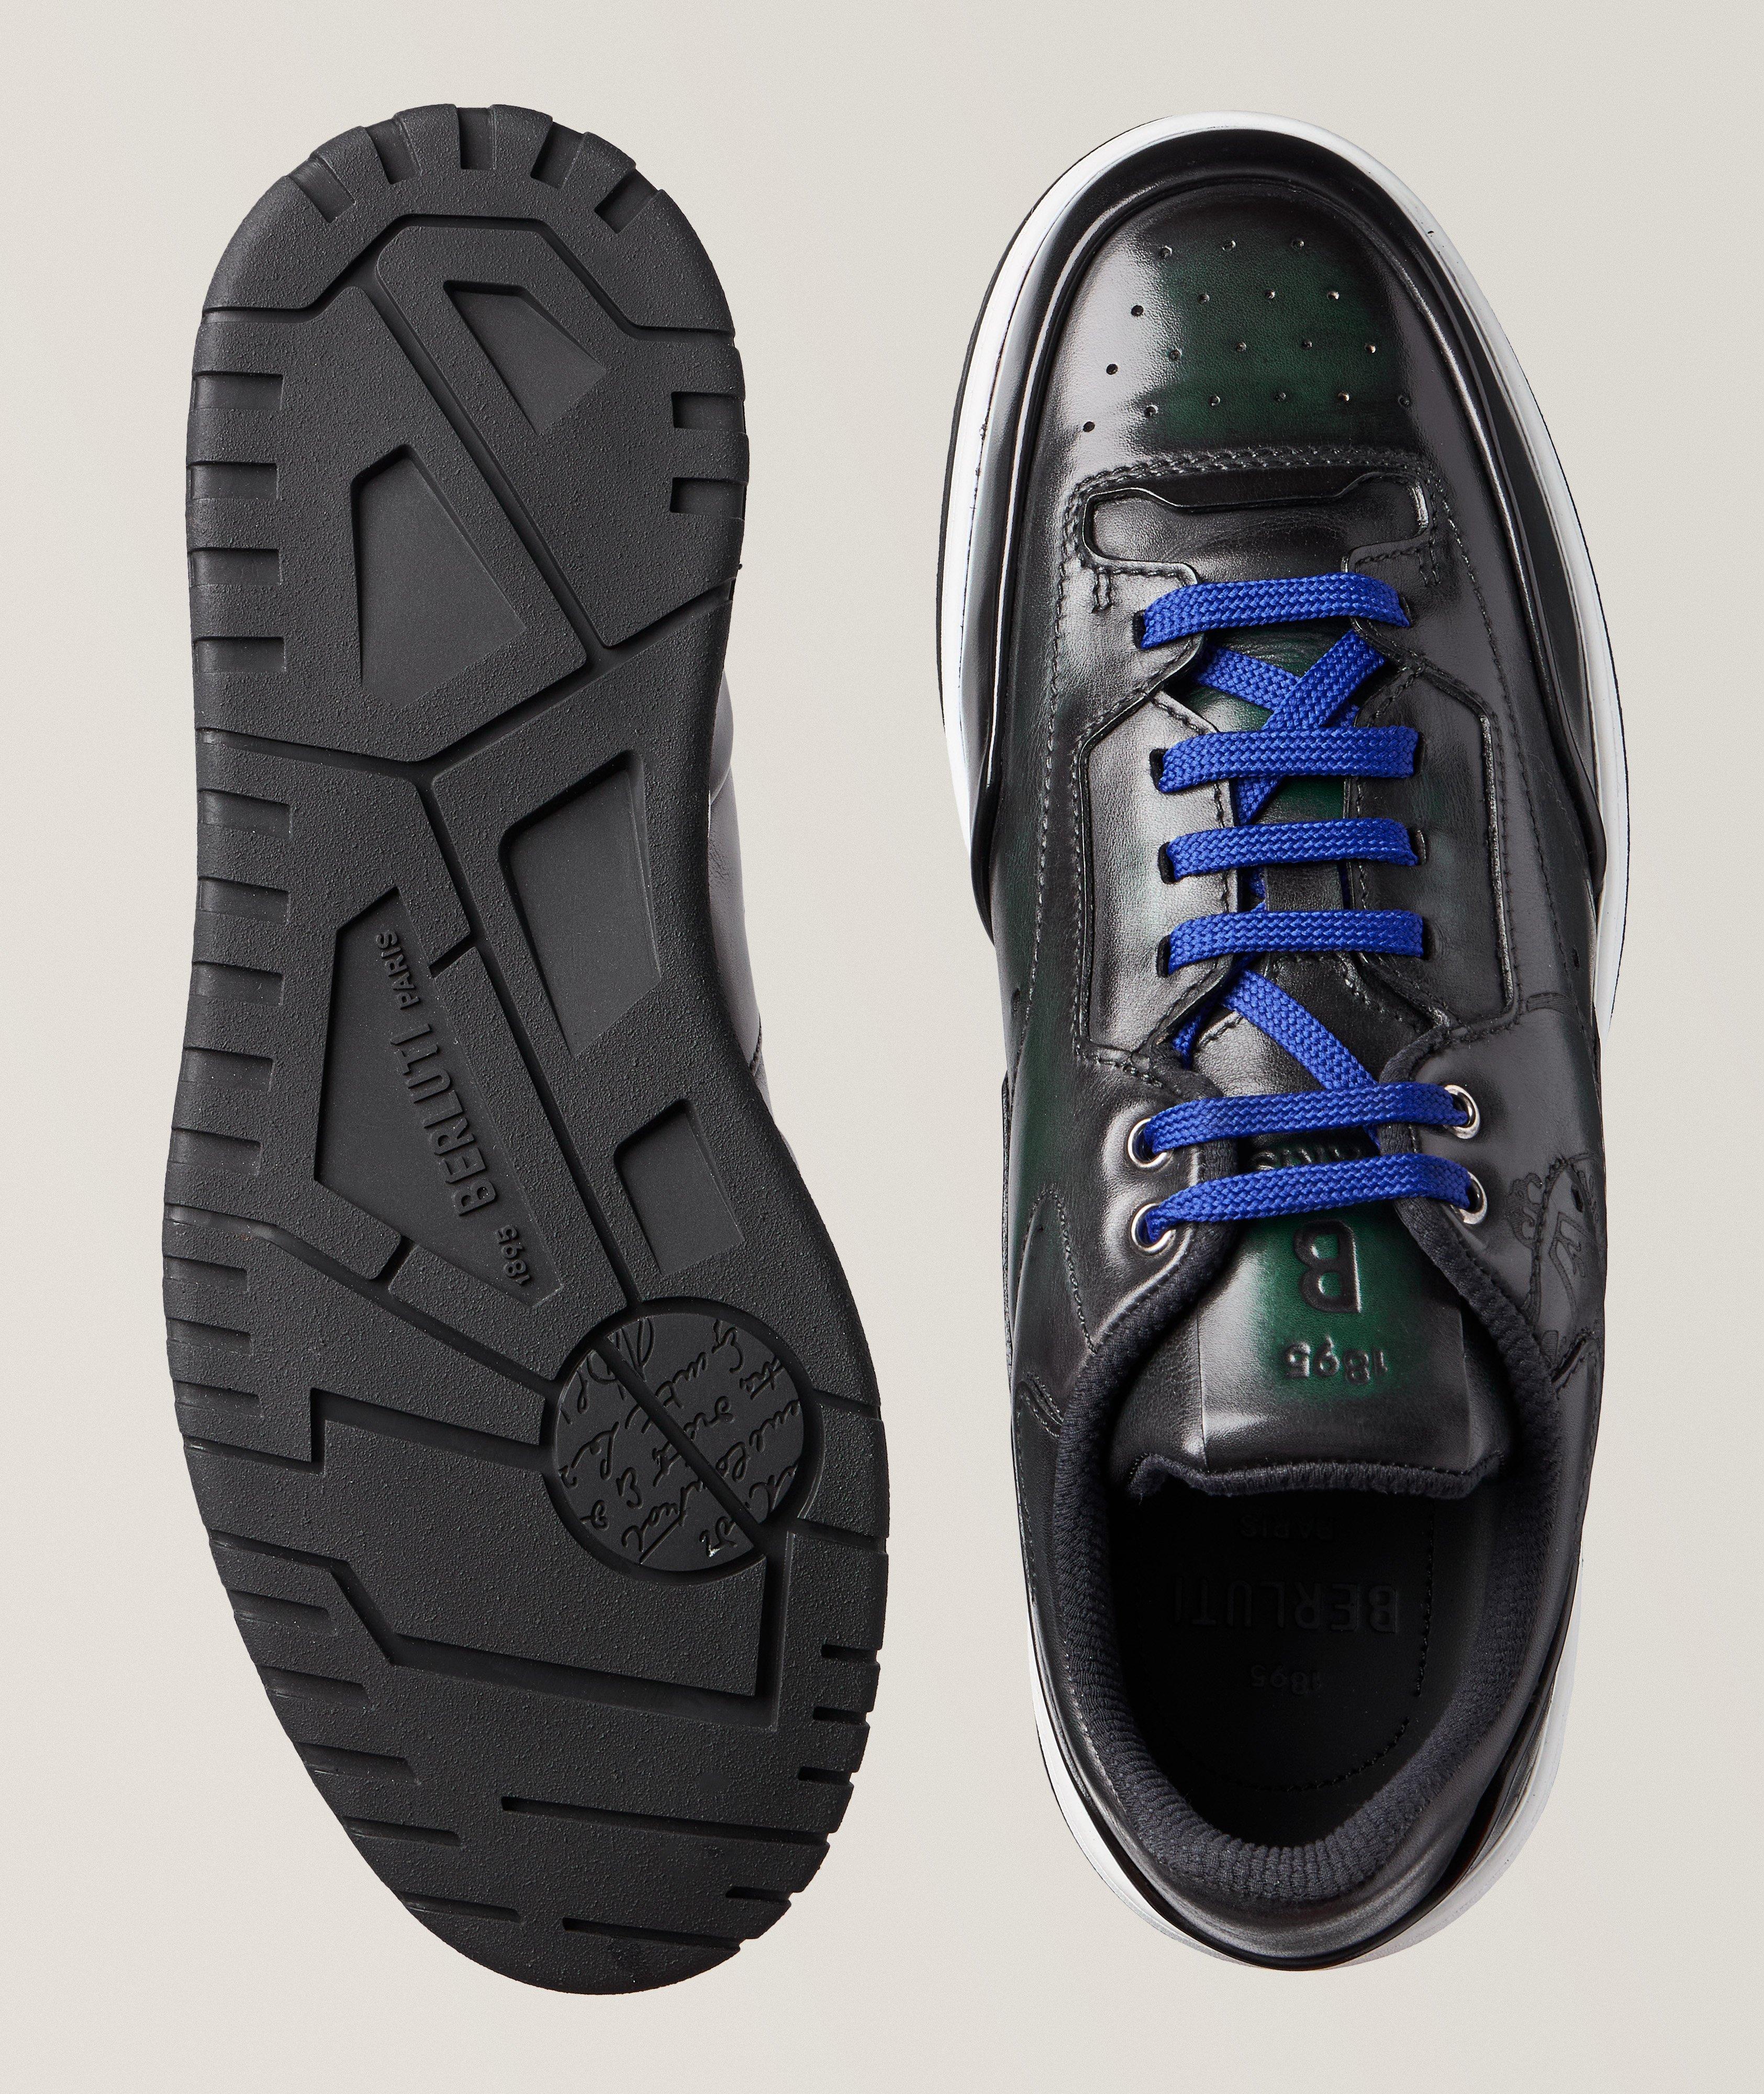 Playoff Scritto Leather Sneakers image 2